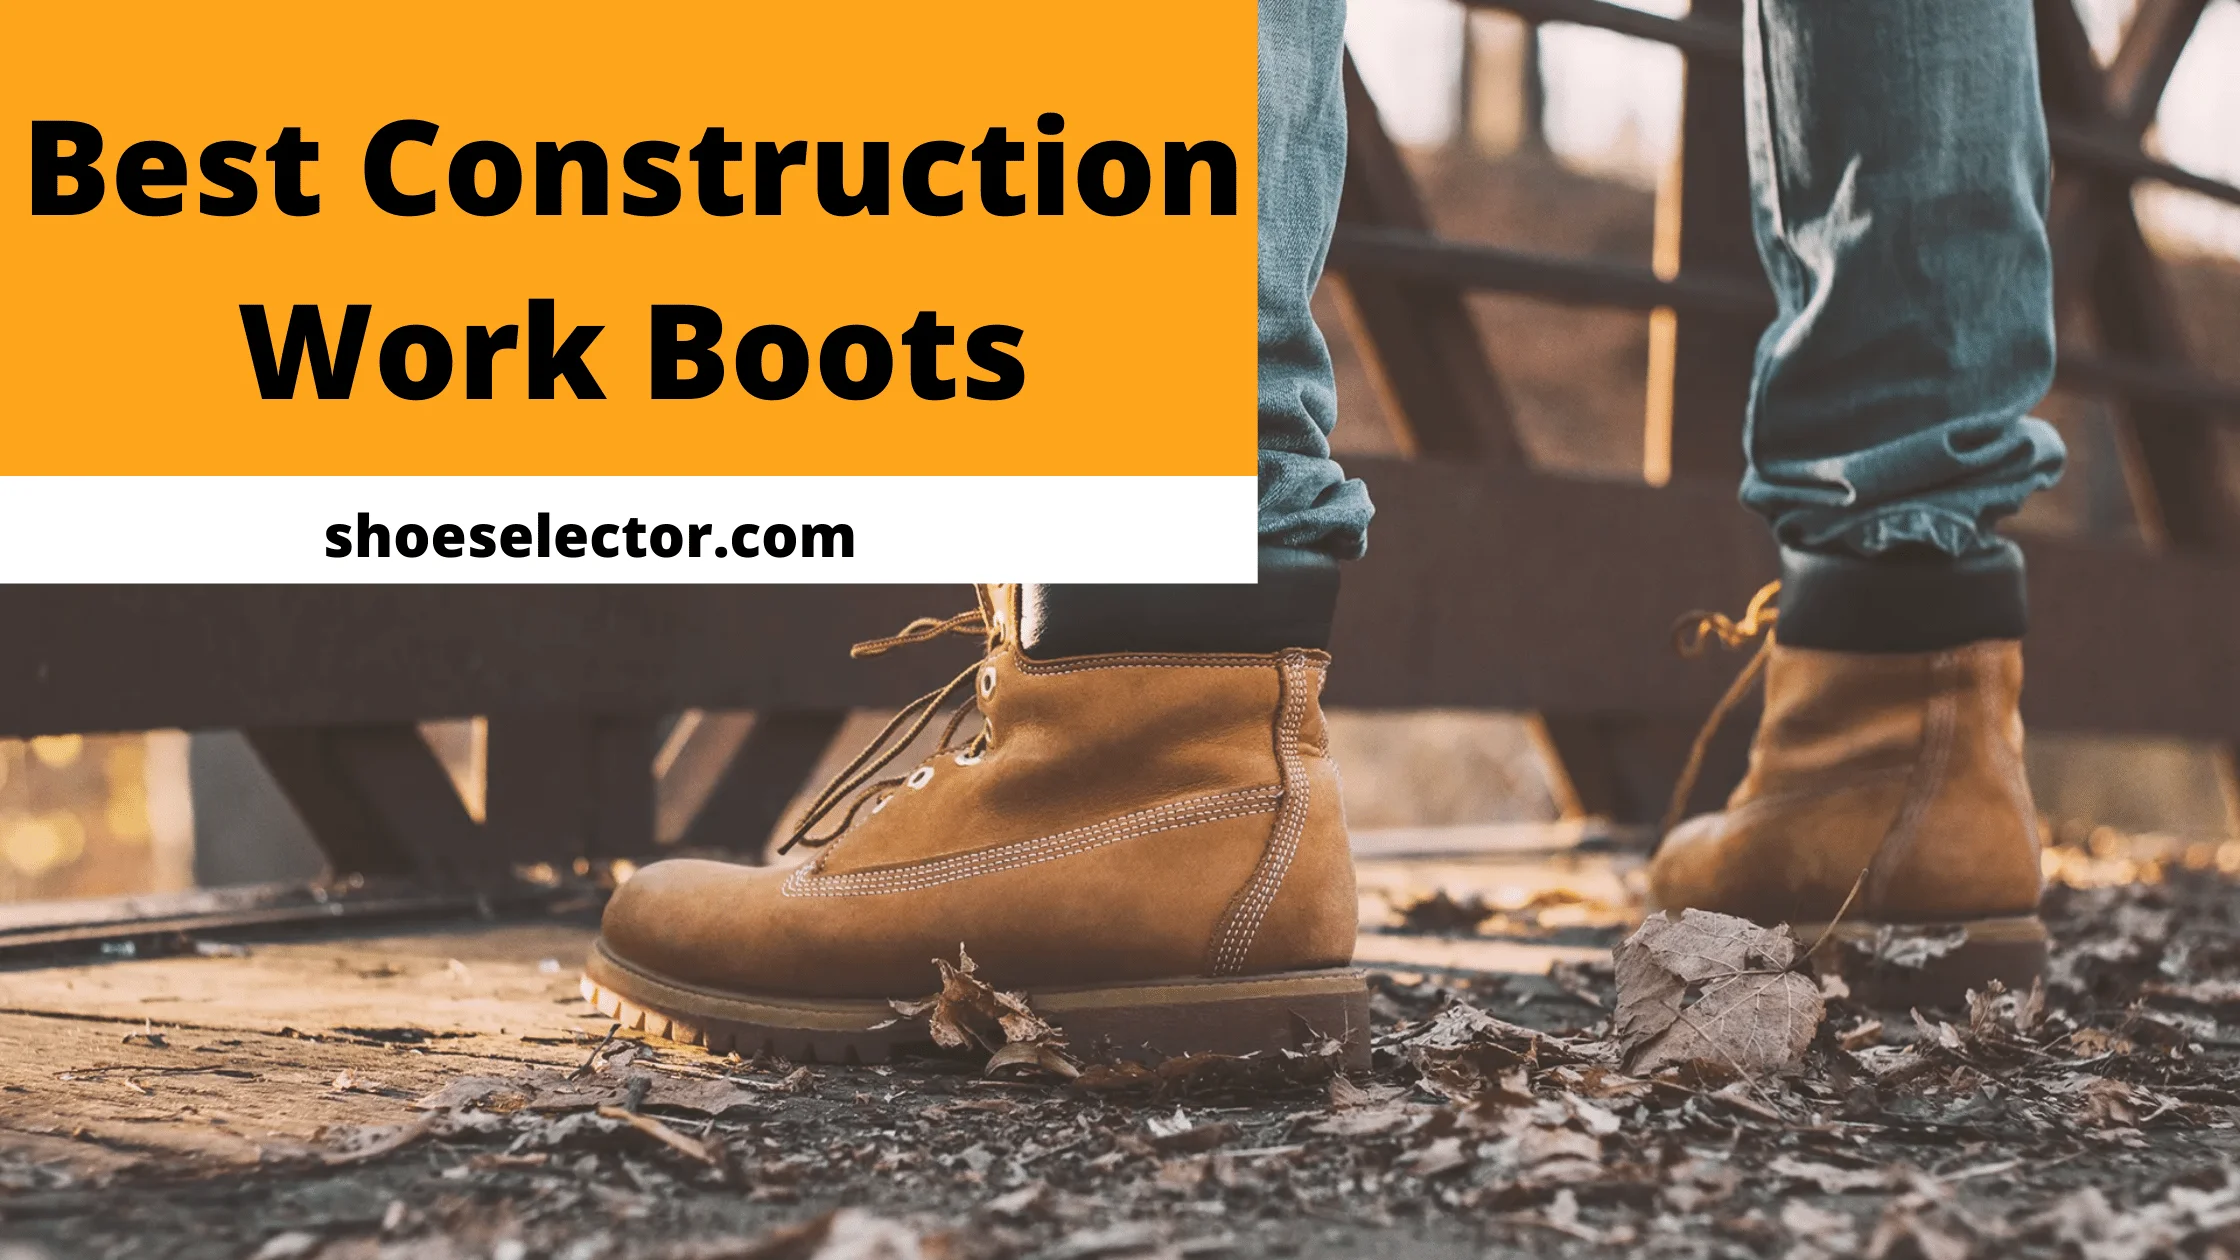 Best Construction Work Boots - Latest Guide